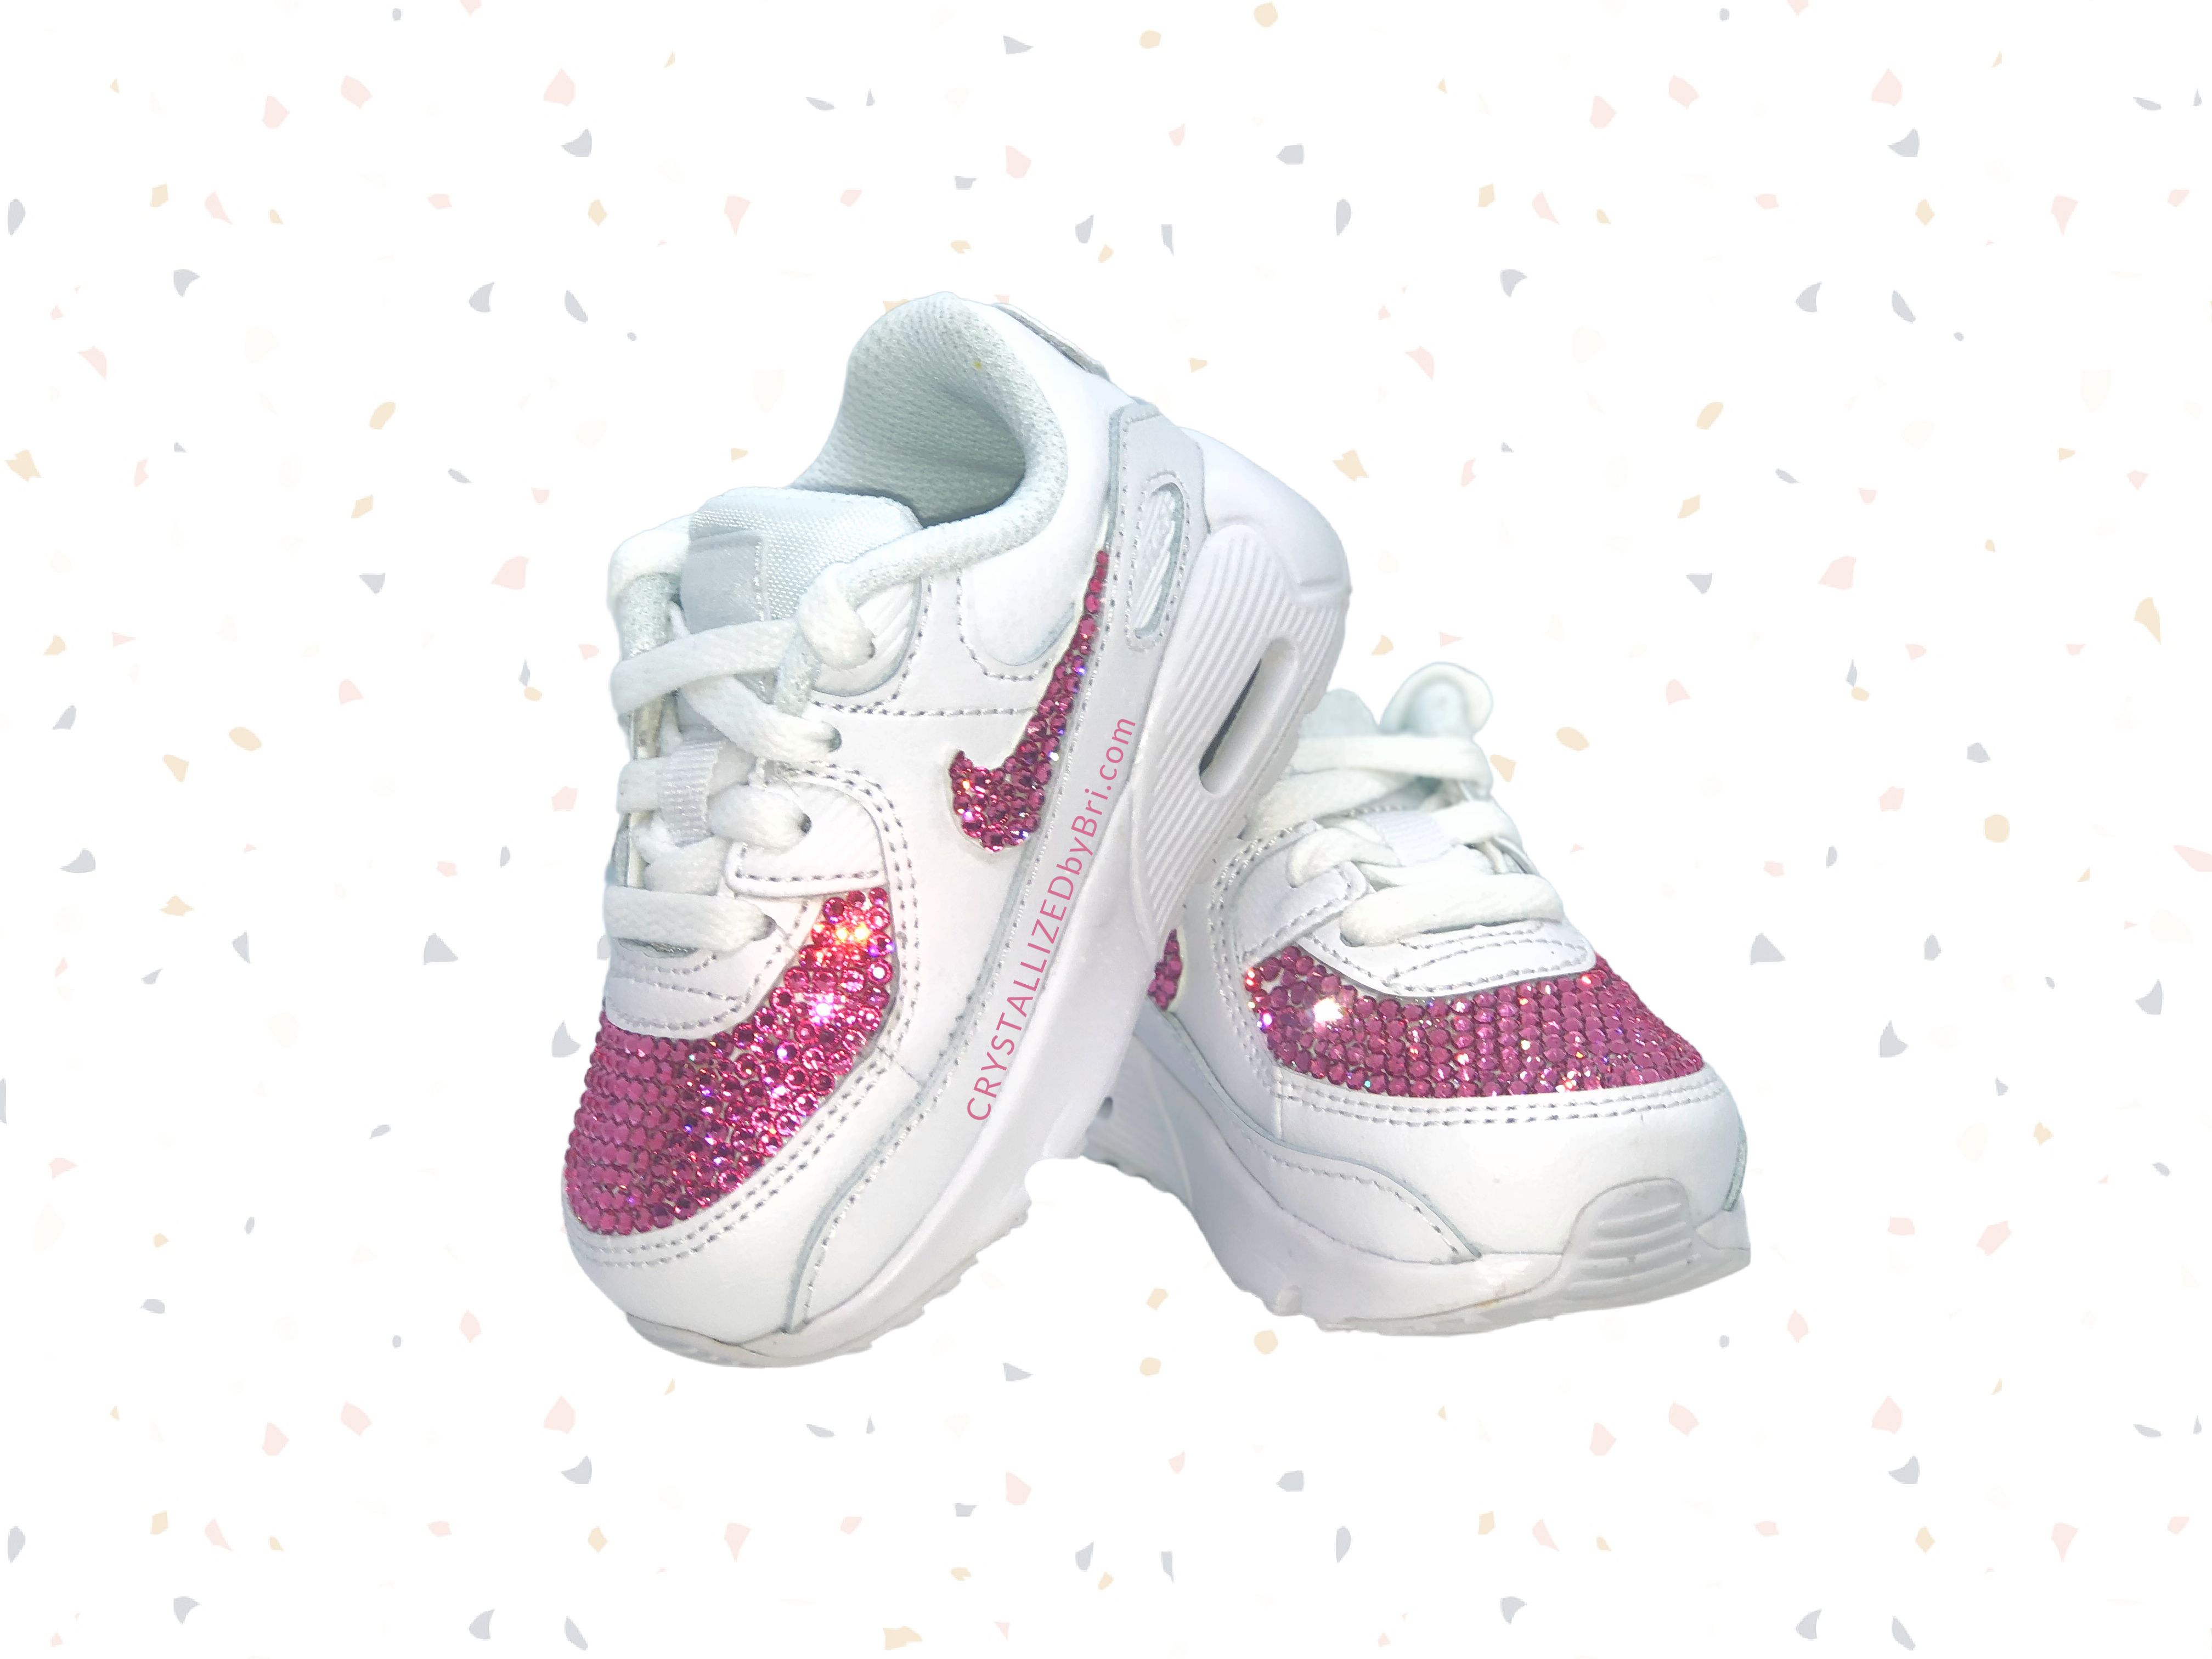 Perth Blackborough labyrint Canberra Handmade Pink Baby Nike's Crystals Crystallized Sneakers Custom Bling Shoes  Genuine European Bedazzled by CRYSTALL!ZED by Bri, LLC | CustomMade.com